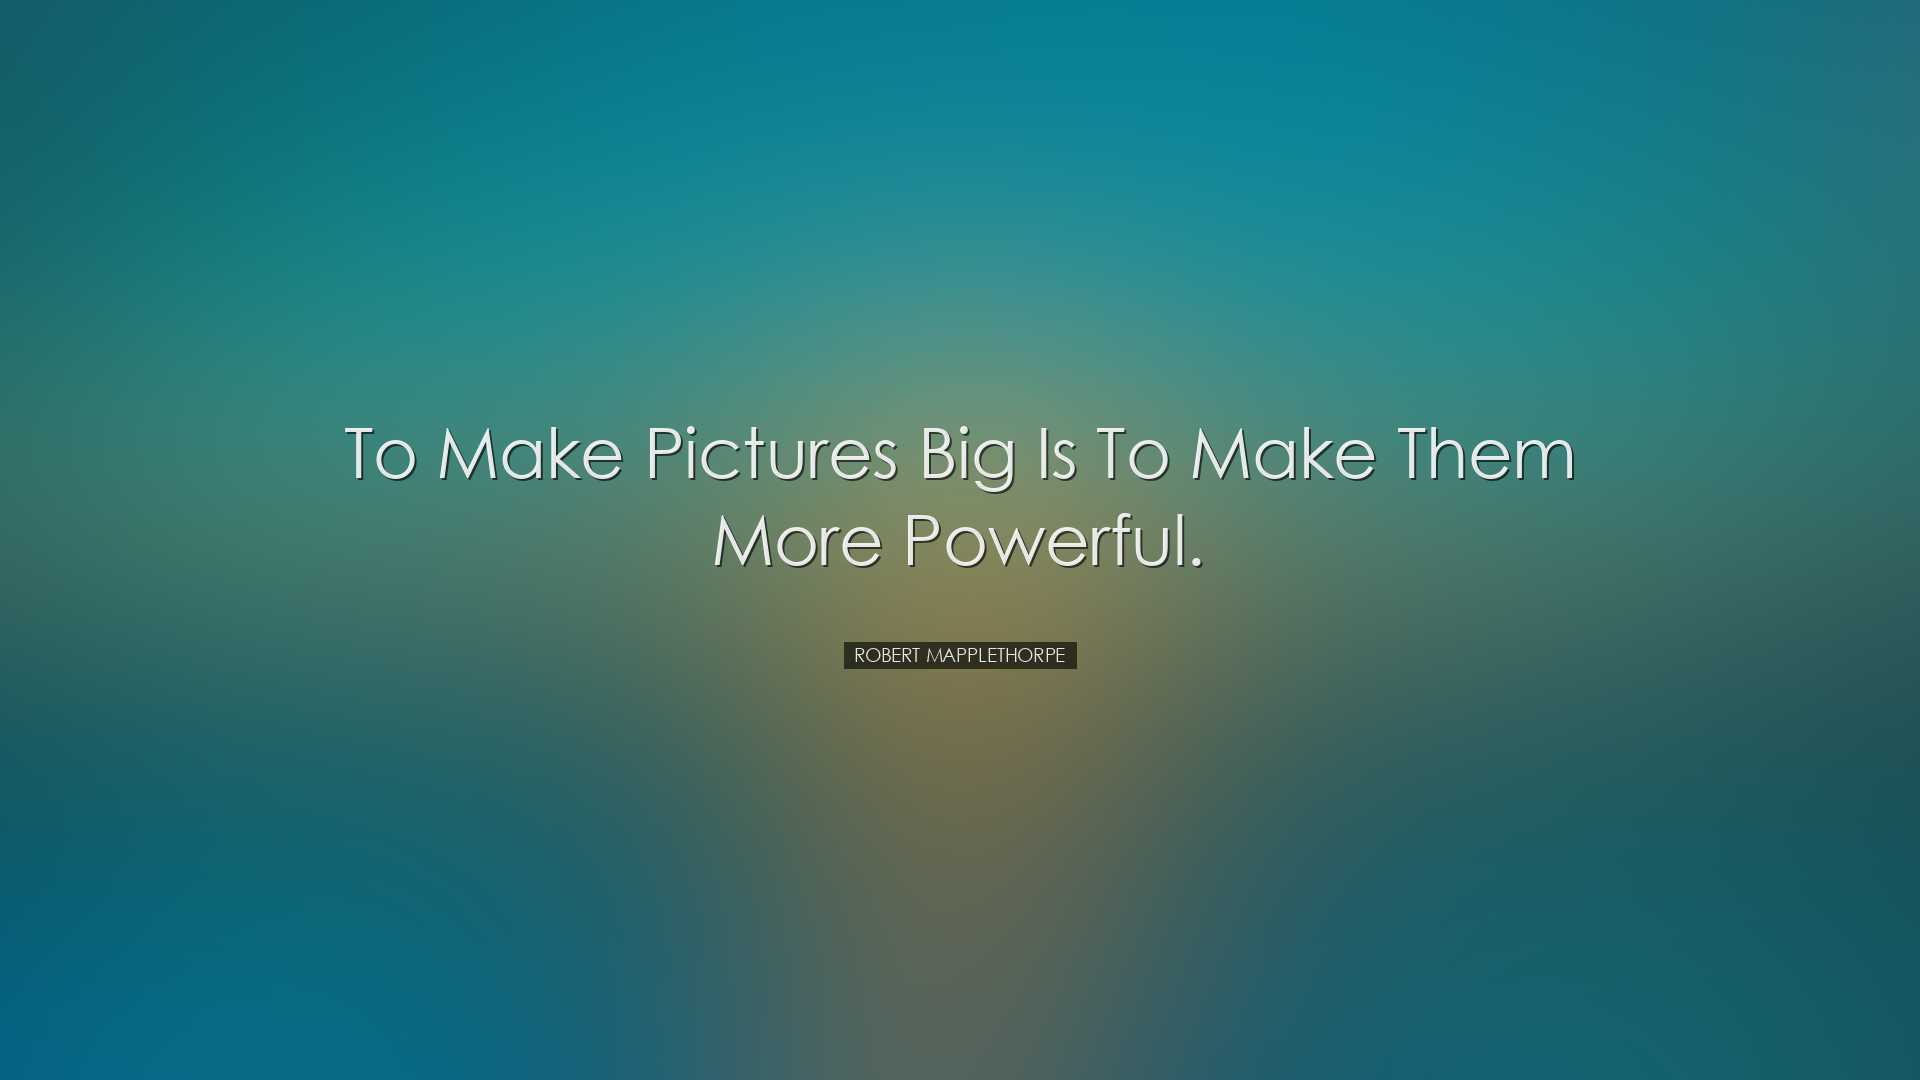 To make pictures big is to make them more powerful. - Robert Mappl